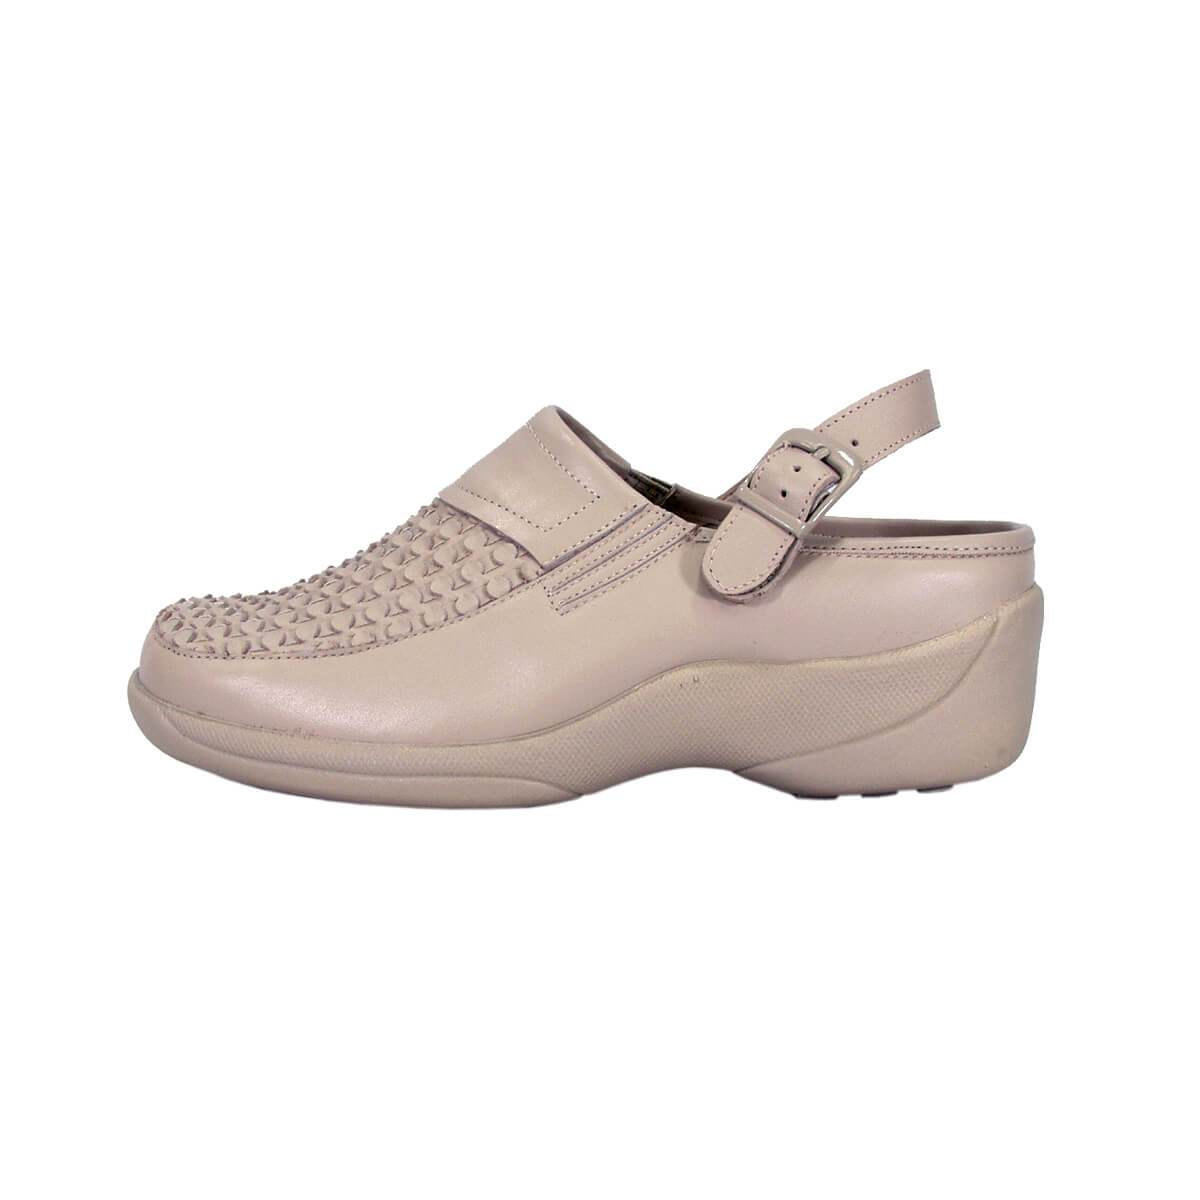 24 HOUR COMFORT Madison Women's Wide Width Leather Clogs